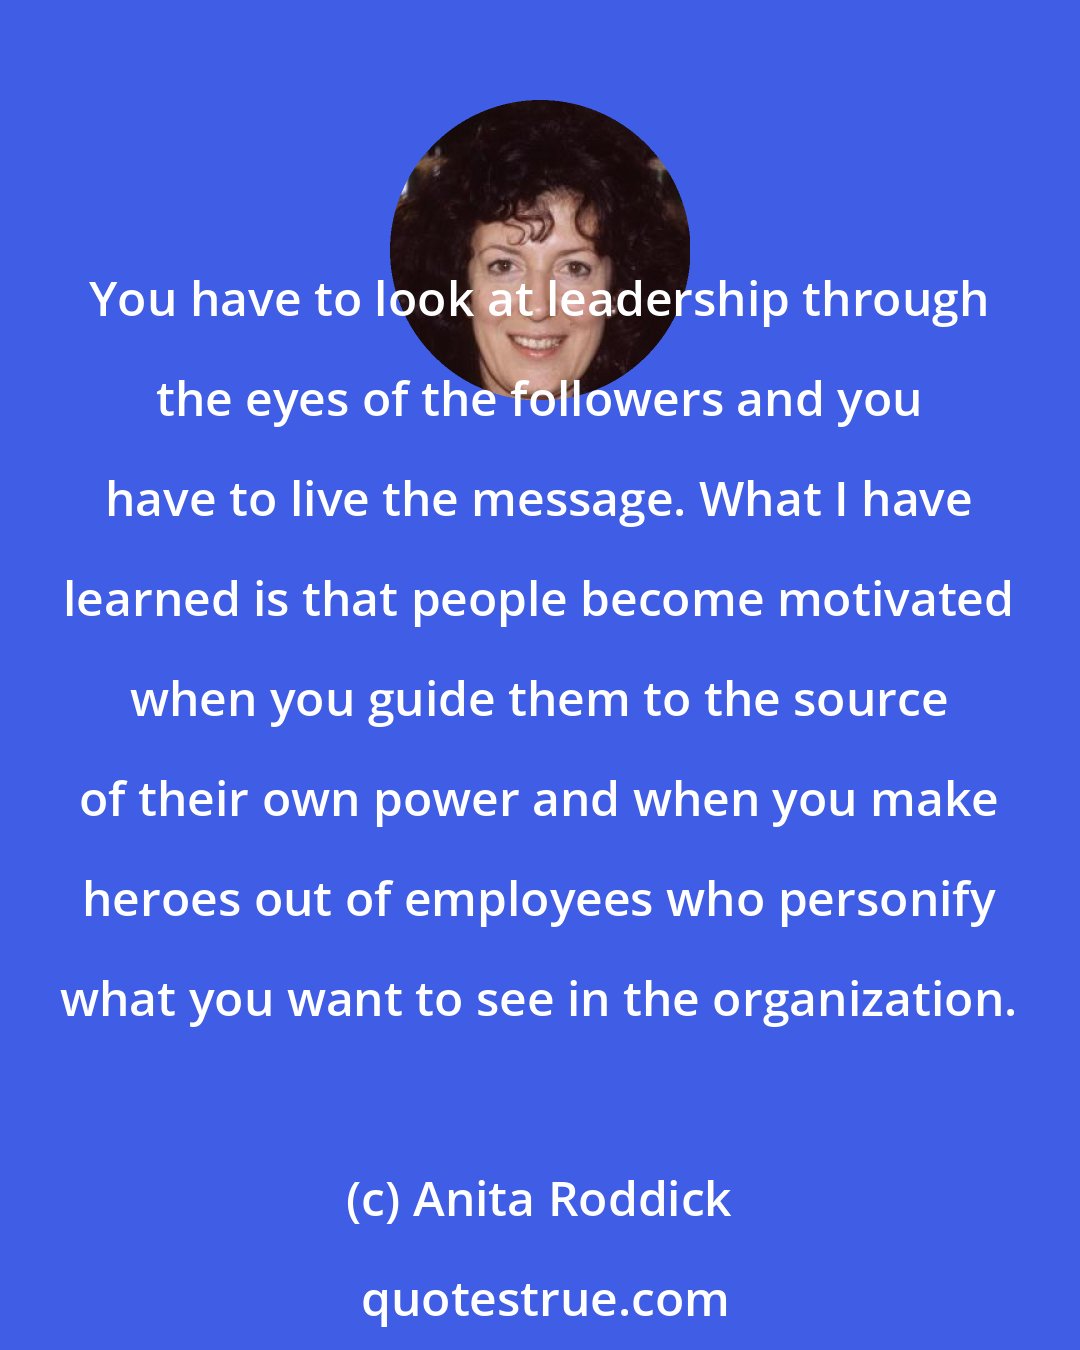 Anita Roddick: You have to look at leadership through the eyes of the followers and you have to live the message. What I have learned is that people become motivated when you guide them to the source of their own power and when you make heroes out of employees who personify what you want to see in the organization.